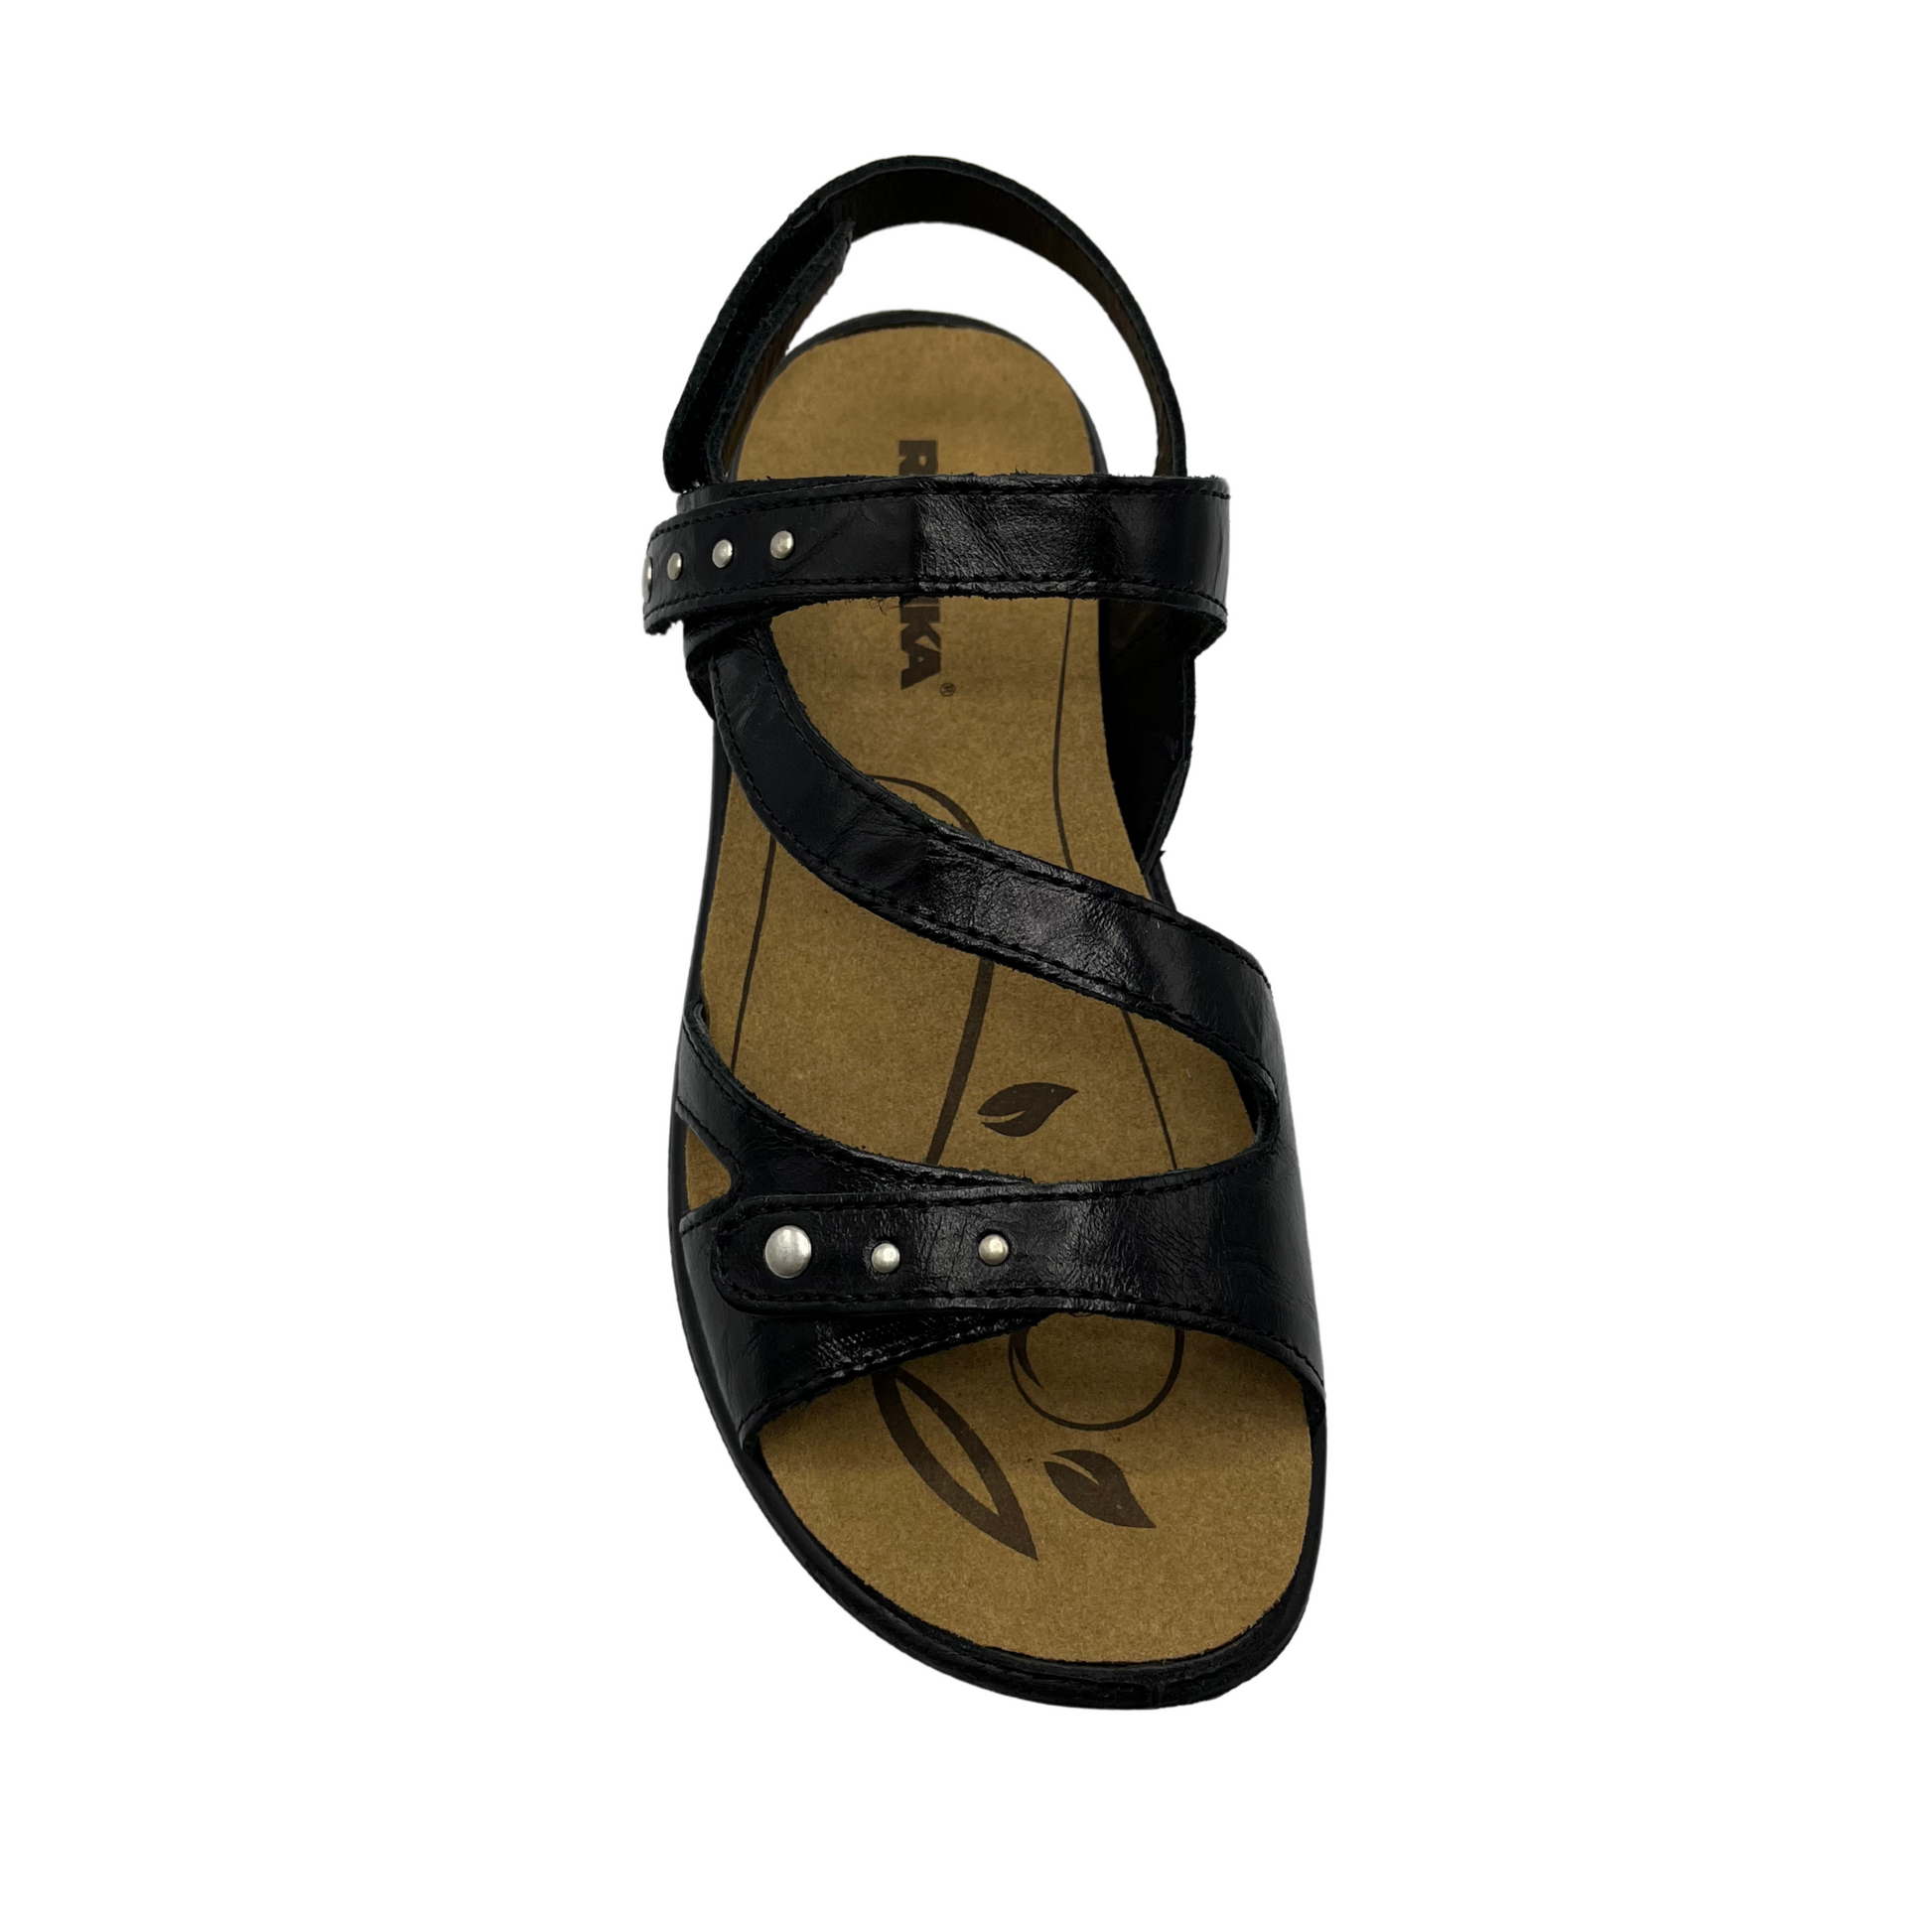 Top view of black leather sandal with brown lining and silver studs on straps